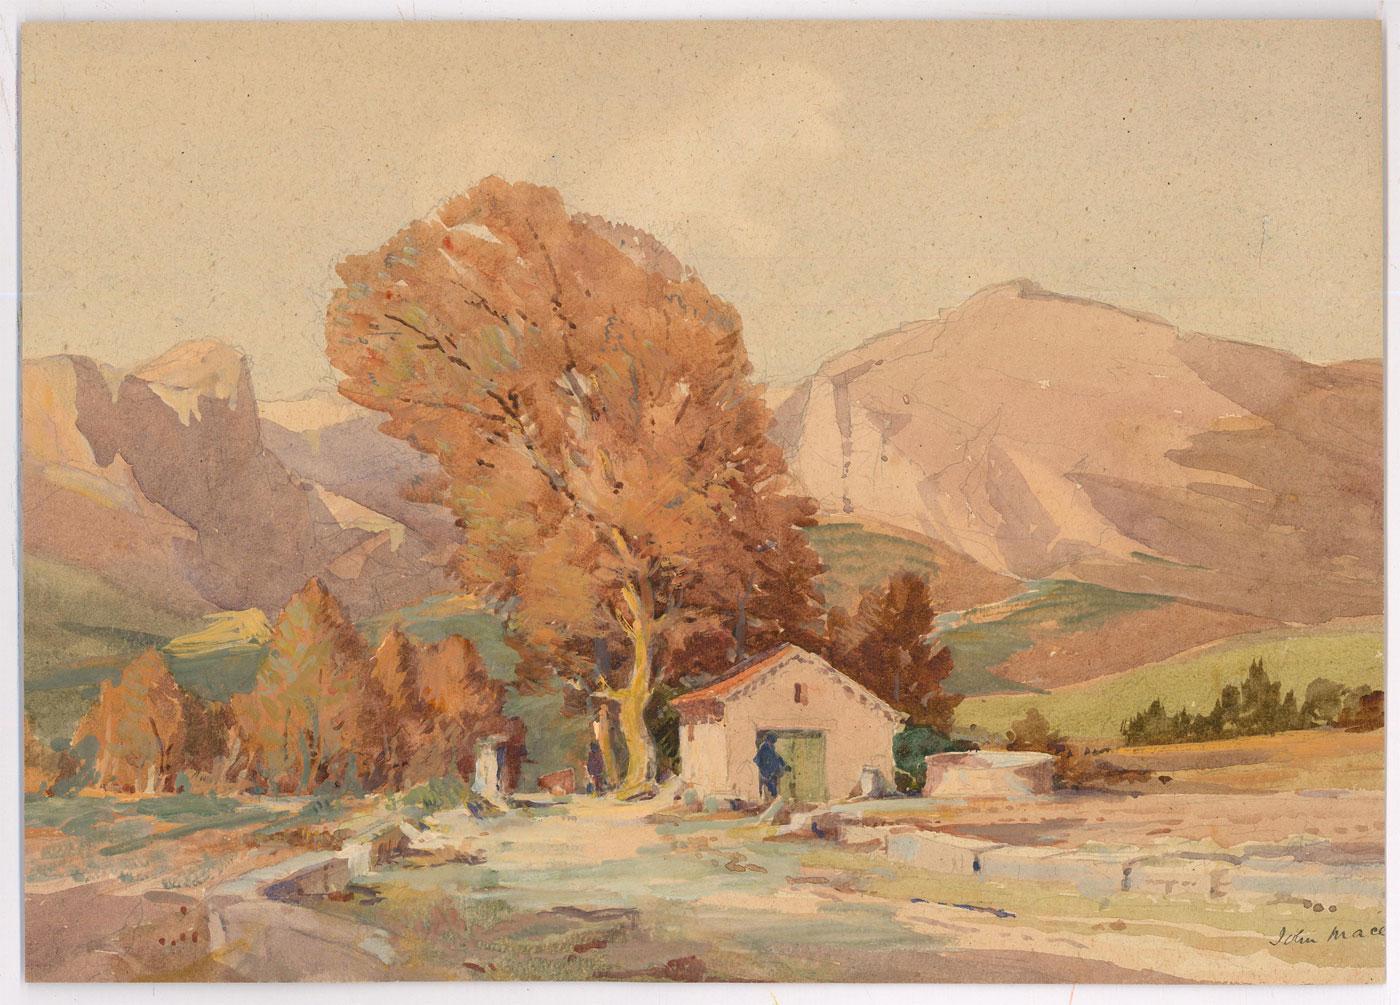 An idyllic landscape by John Mace depicting an Autumnal mountain range with a small hut nestled beneath a large tree. Completed with touches of gouache. Signed to the lower right. Inscribed illegibly to the reverse. On paper.
